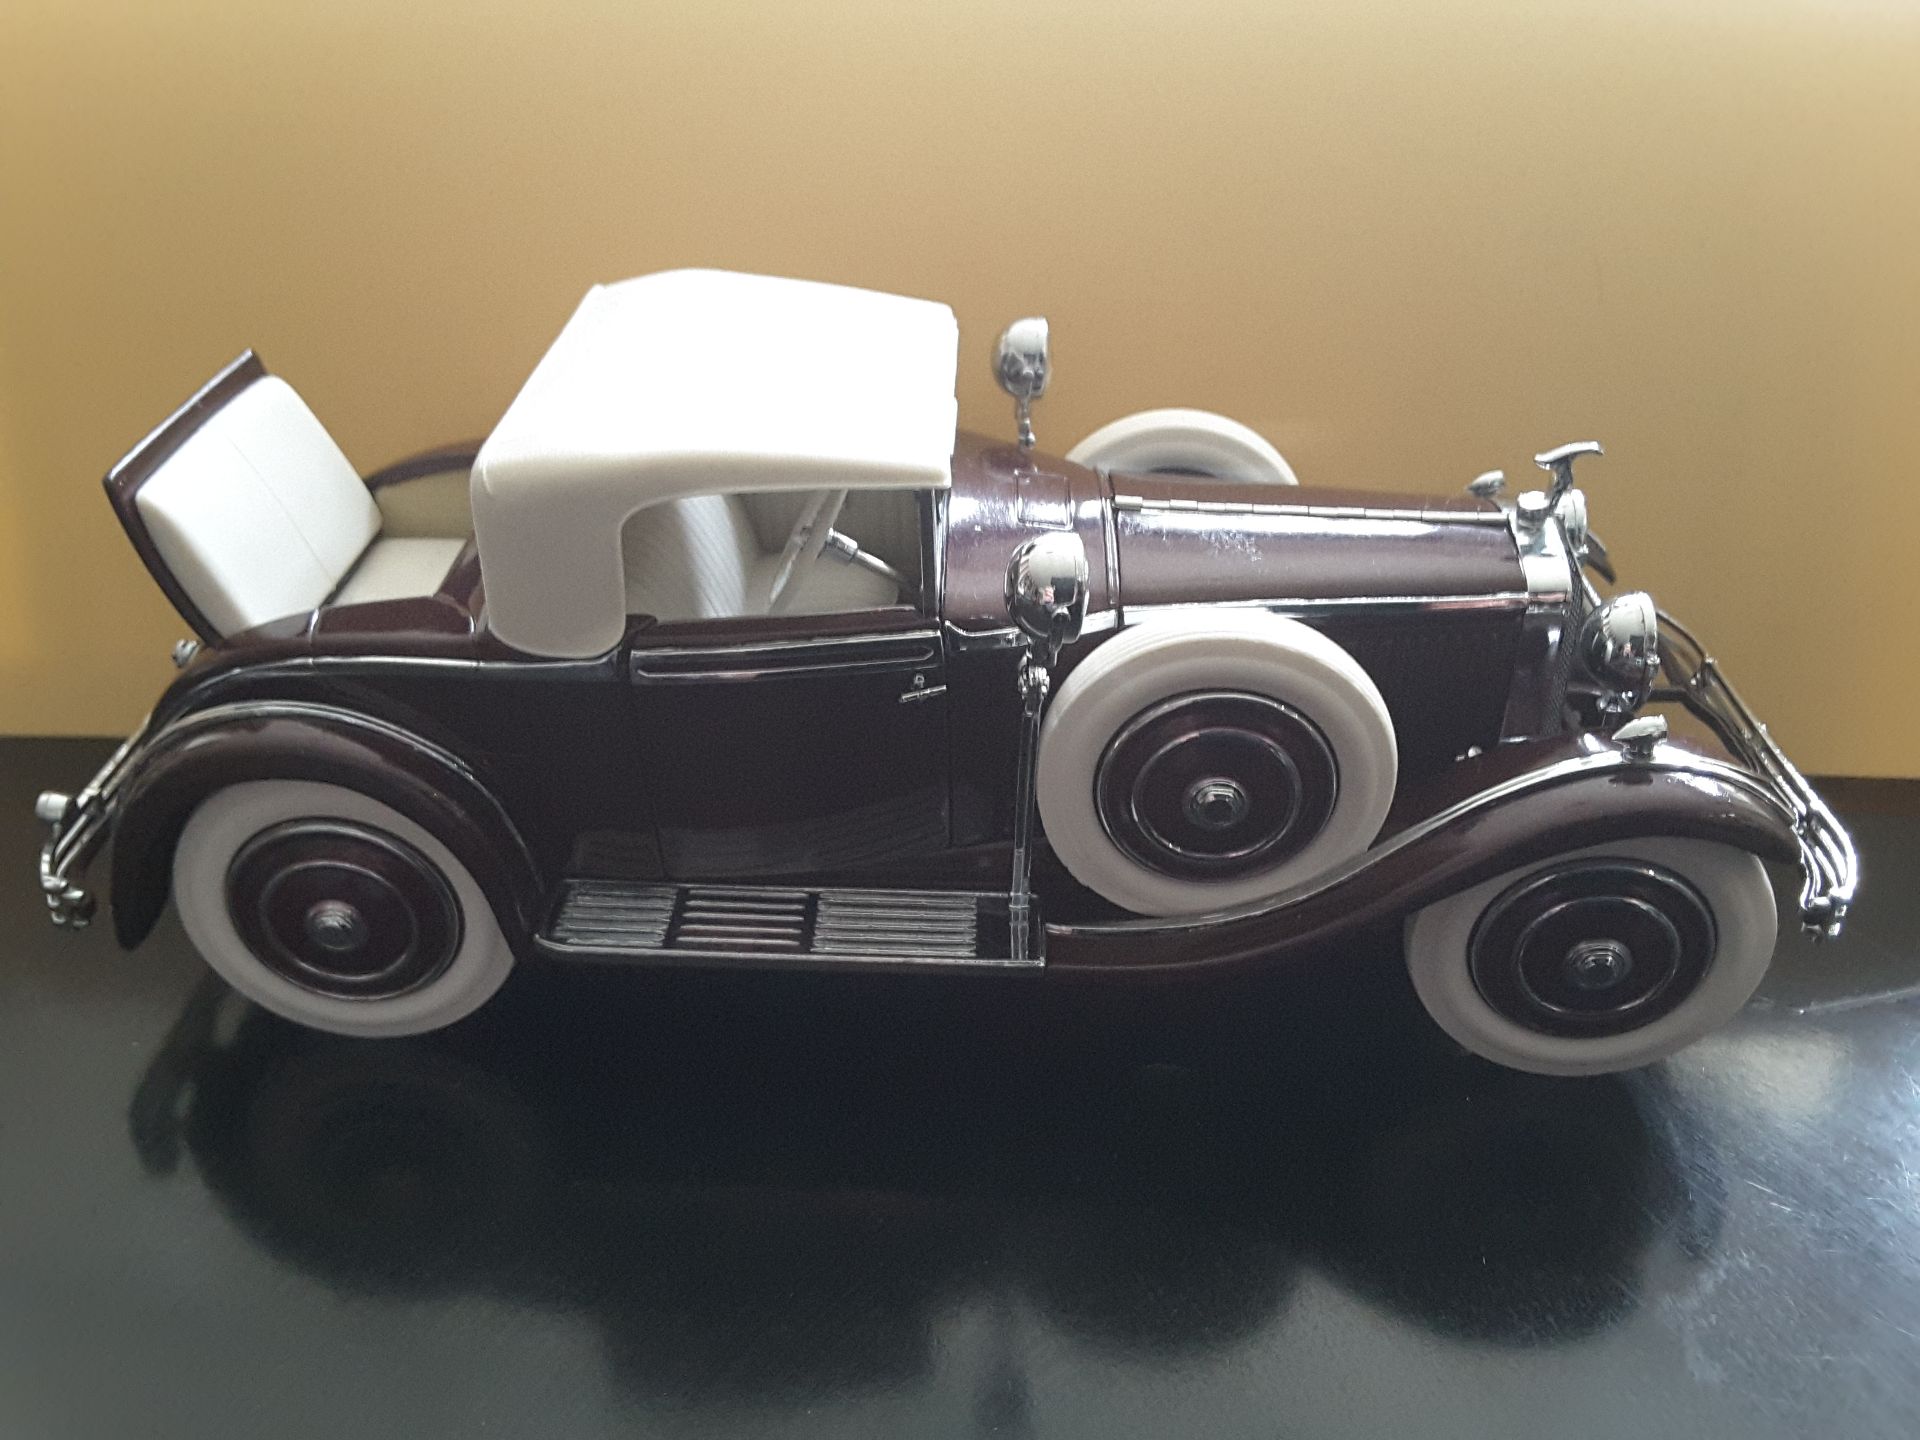 Franklin Mint Diecast 1925 Hispano-Suiza H6B - Image 8 of 11